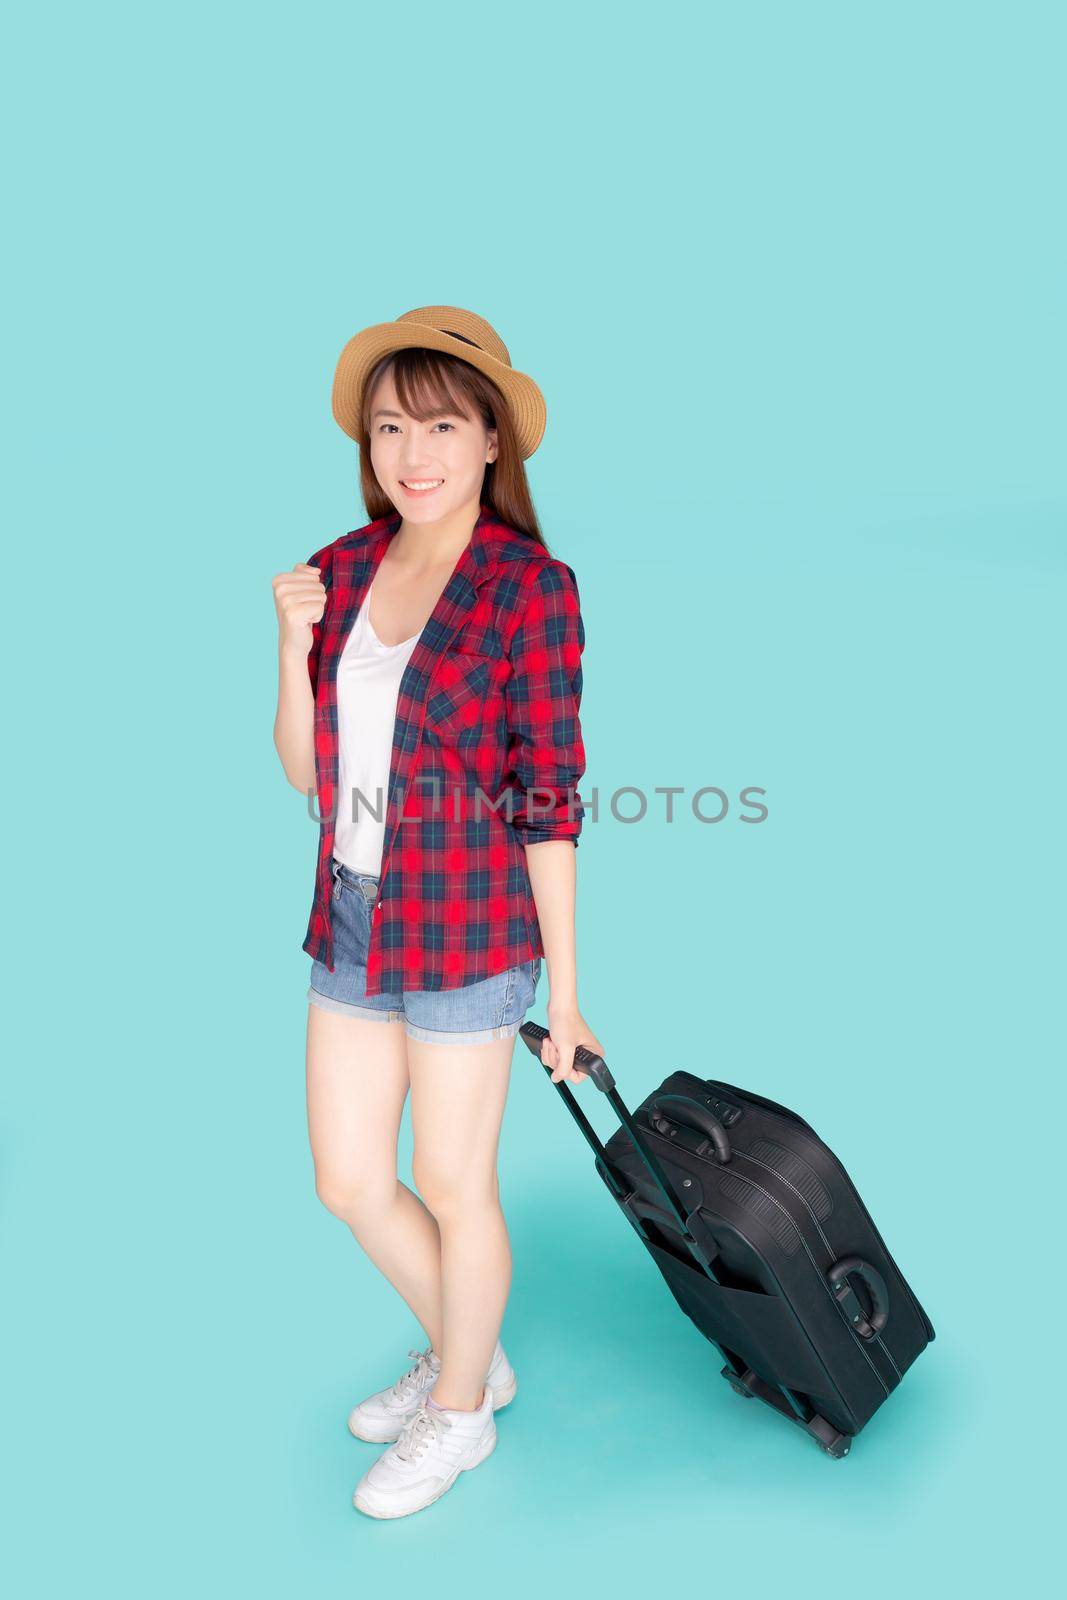 Beautiful young asian woman pulling suitcase isolated on blue background, asia girl having expression cheerful and success holding luggage walking in vacation with excited, journey and travel concept.